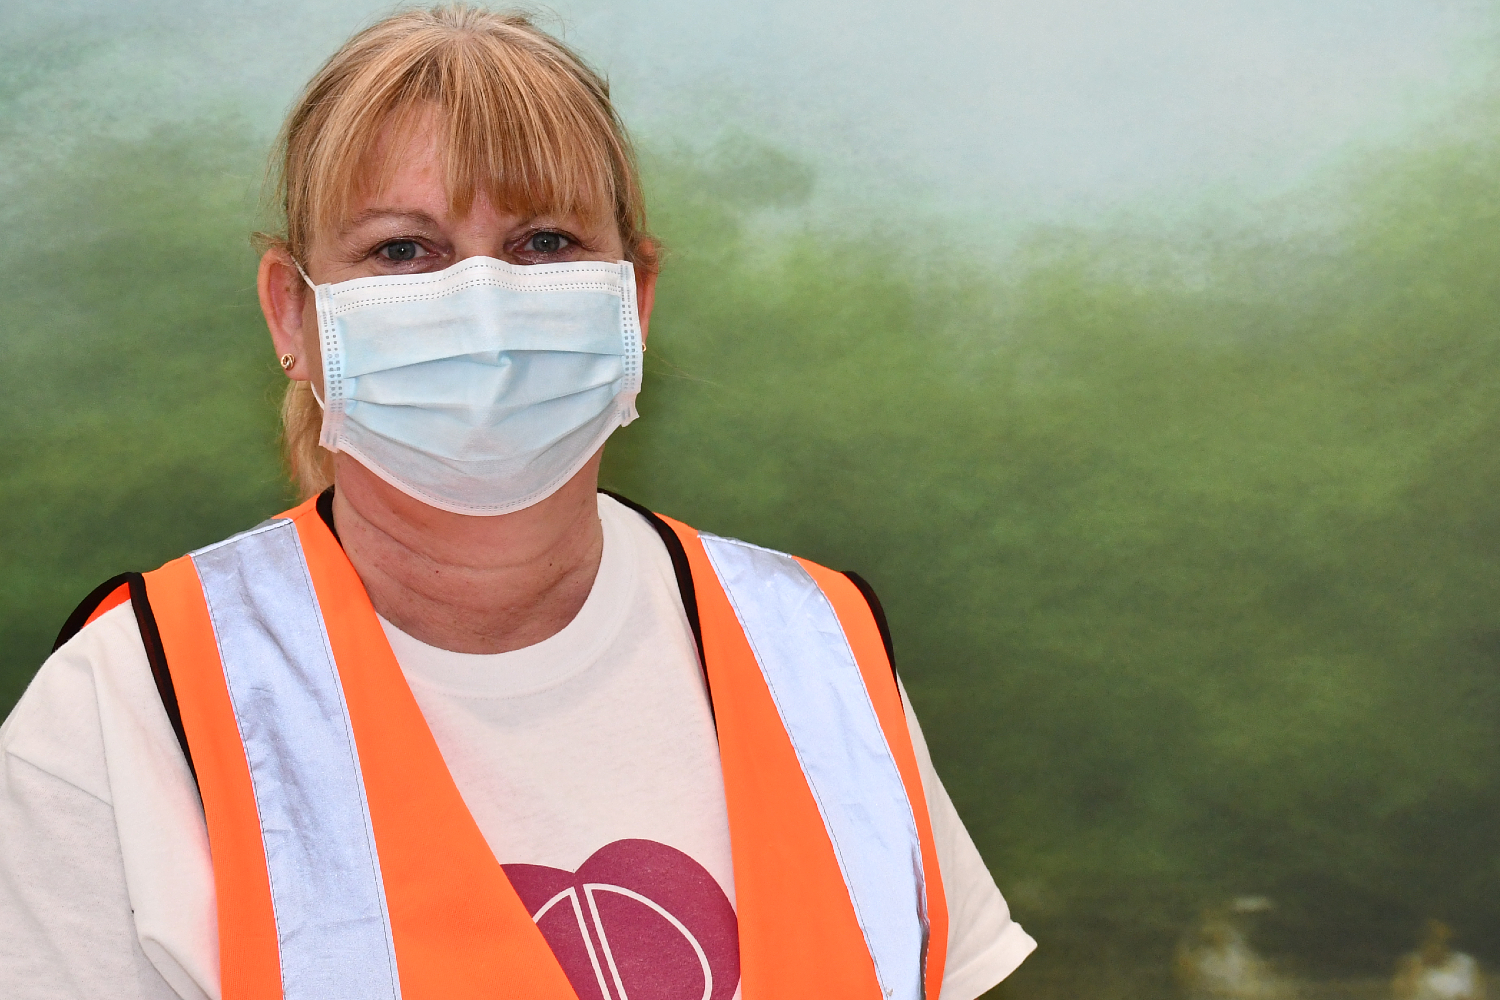 A person with blonde hair, wearing a mask and an orange hi-vis vest.